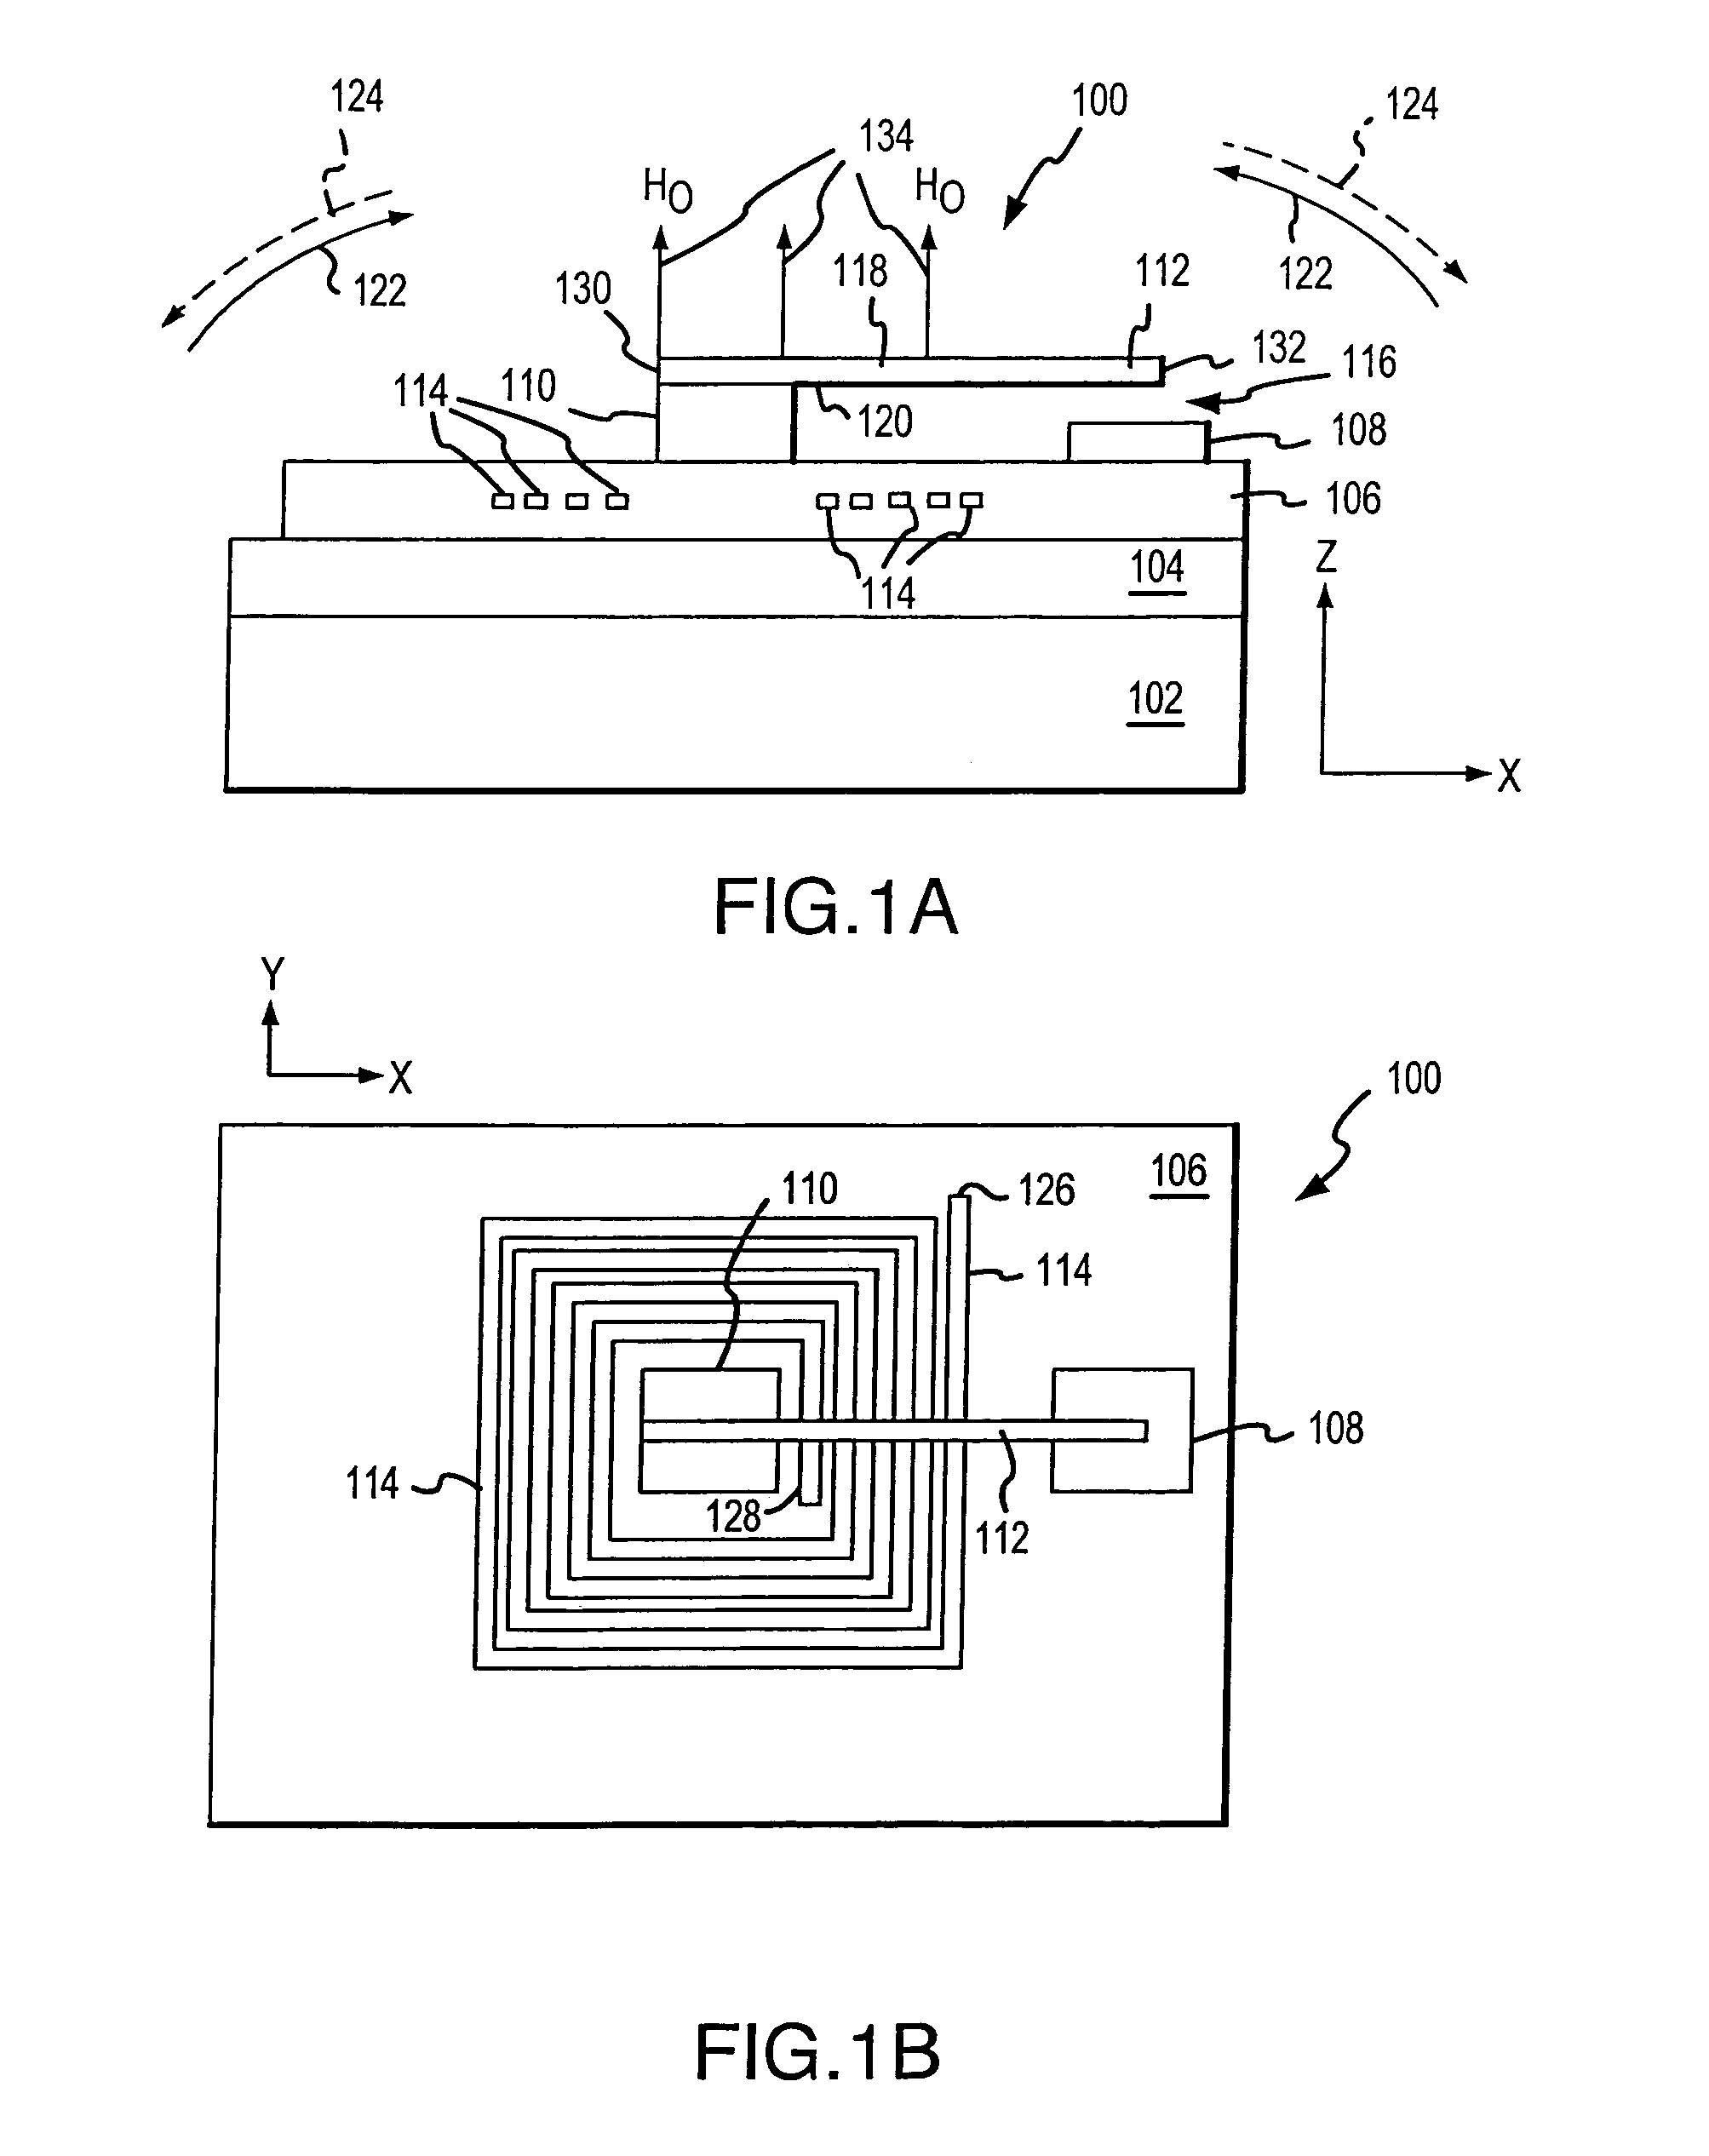 Micro-magnetic latching switch with relaxed permanent magnet alignment requirements